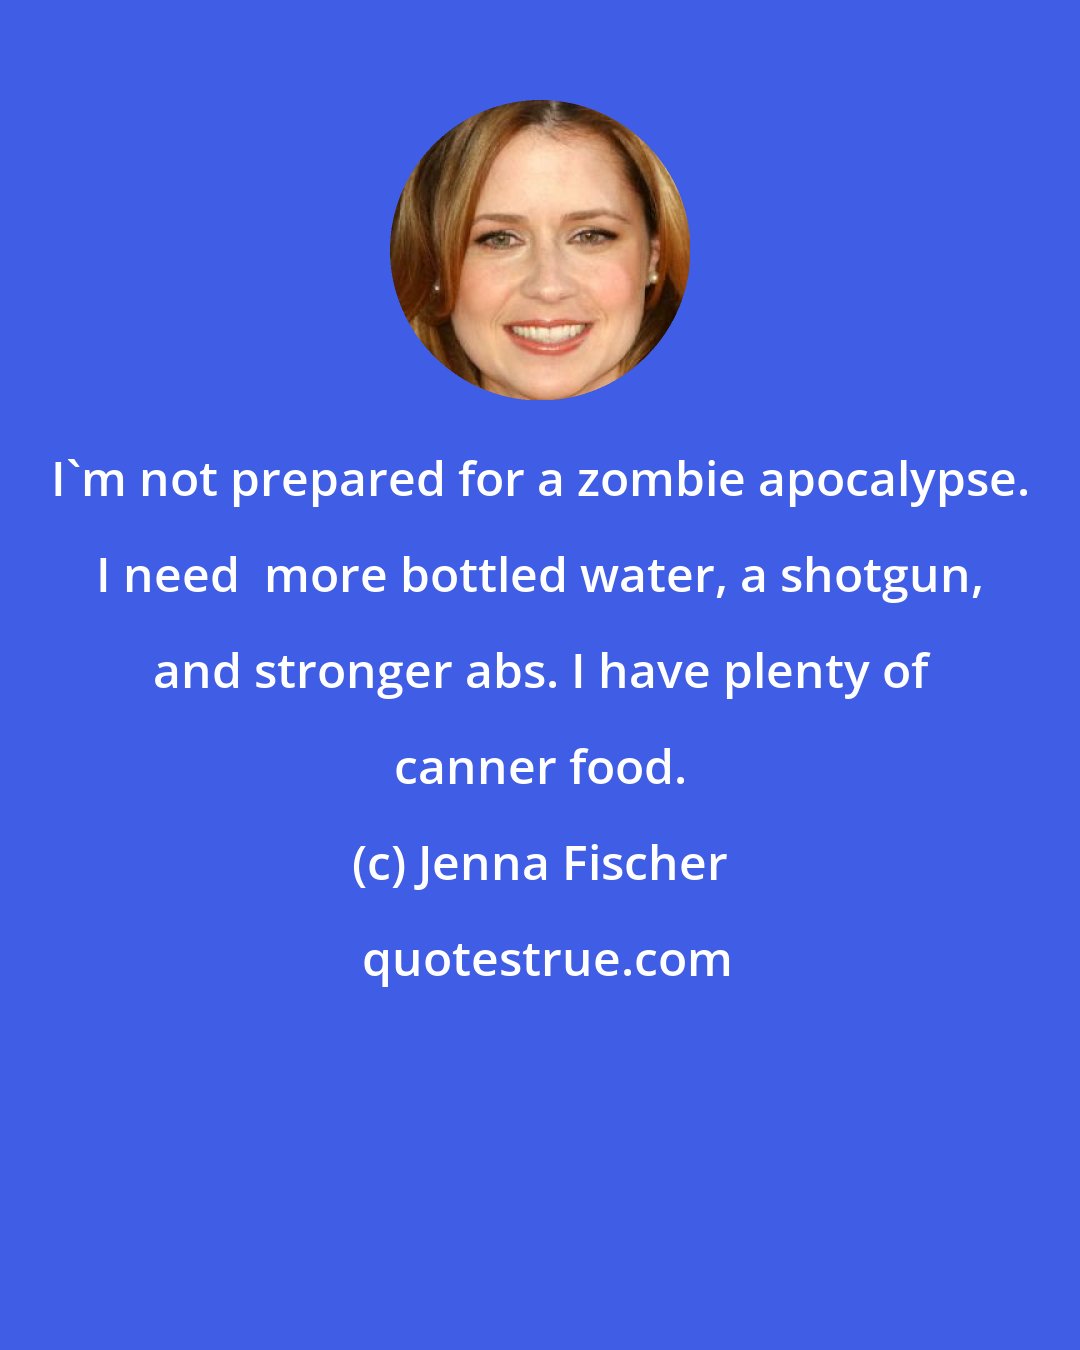 Jenna Fischer: I'm not prepared for a zombie apocalypse. I need  more bottled water, a shotgun, and stronger abs. I have plenty of canner food.